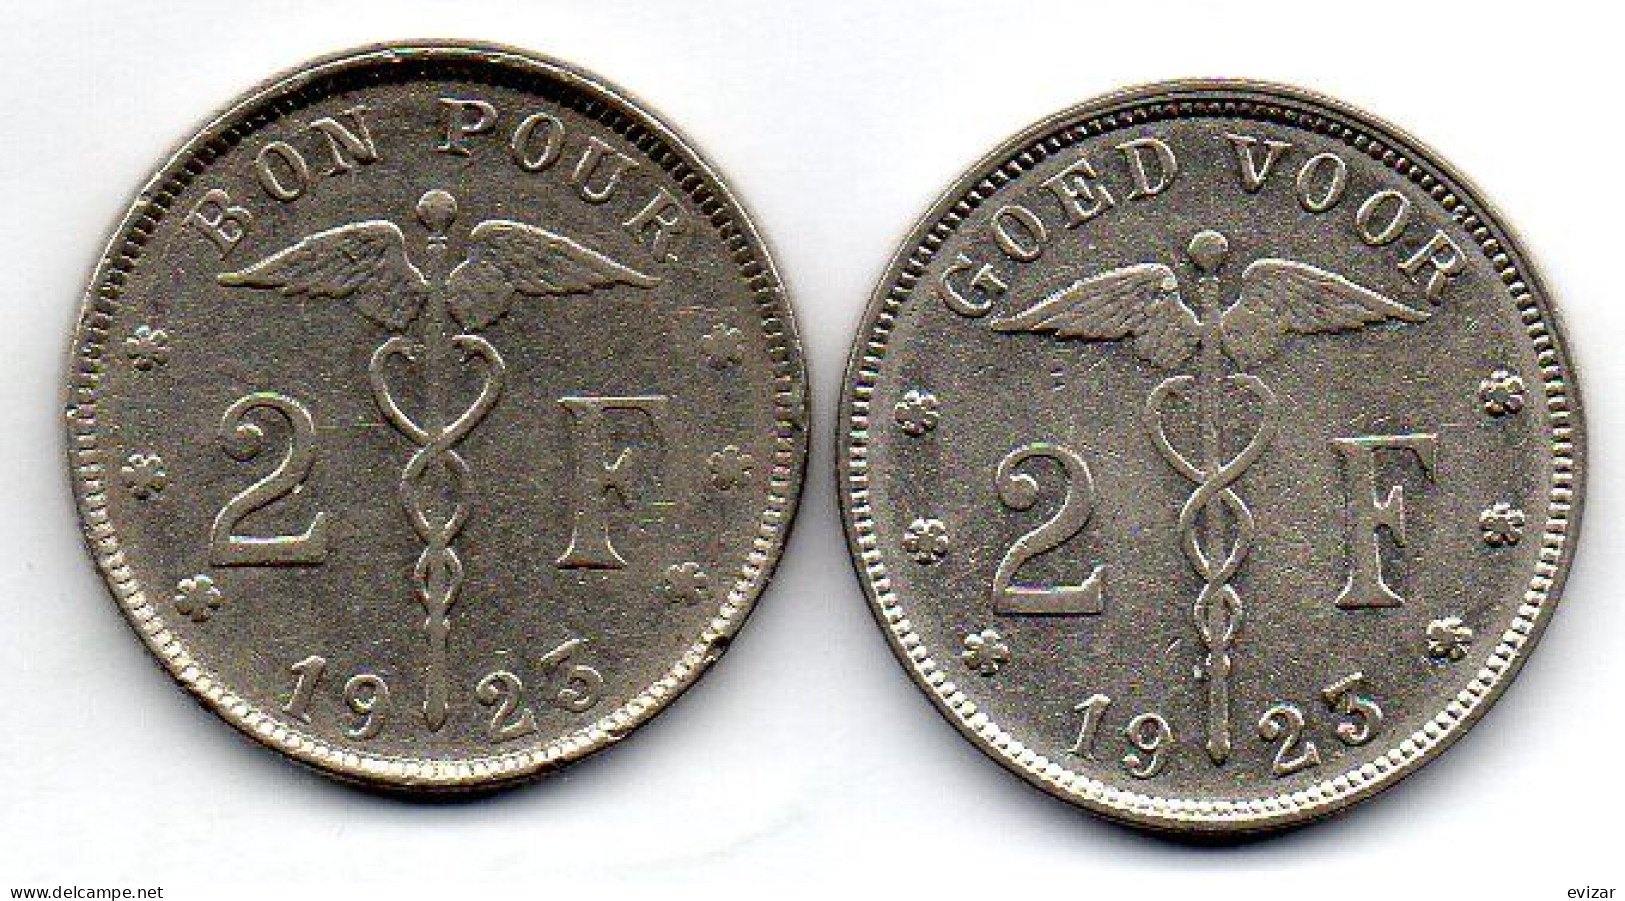 BELGIUM - Set Of Two Coins 2 Francs, Nickel, Year 1923, KM # 91.1, 92, French & Dutch Legend - 2 Francos